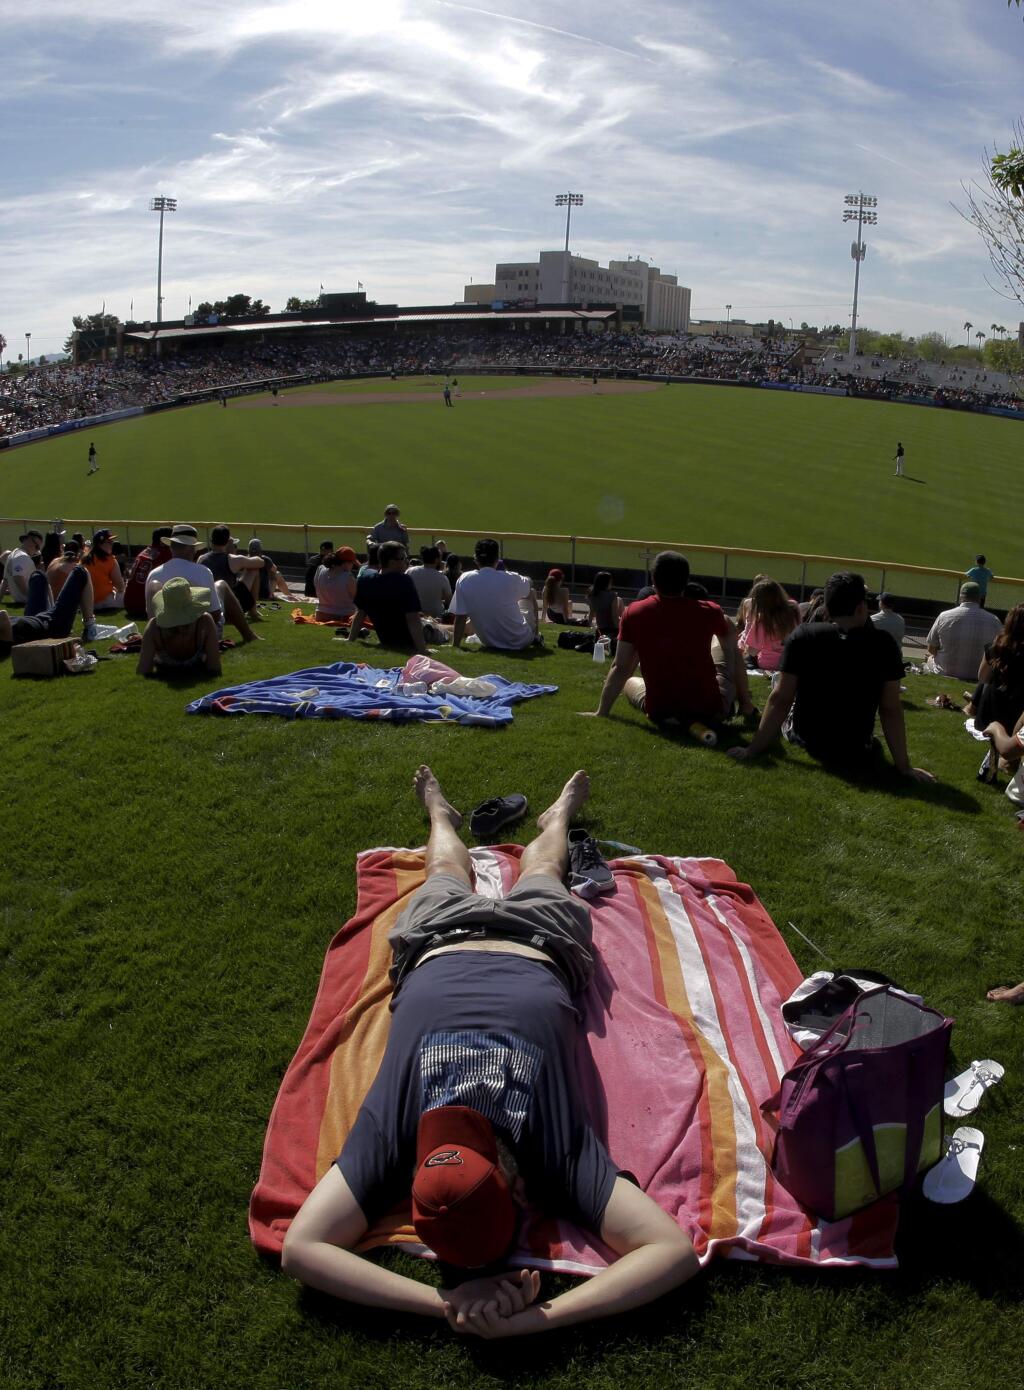 Corey Whitcher naps in the outfield sun during a spring baseball game between the San Francisco Giants and the Los Angeles Angels in Scottsdale, Ariz., Wednesday, March 2, 2016. (AP Photo/Chris Carlson)